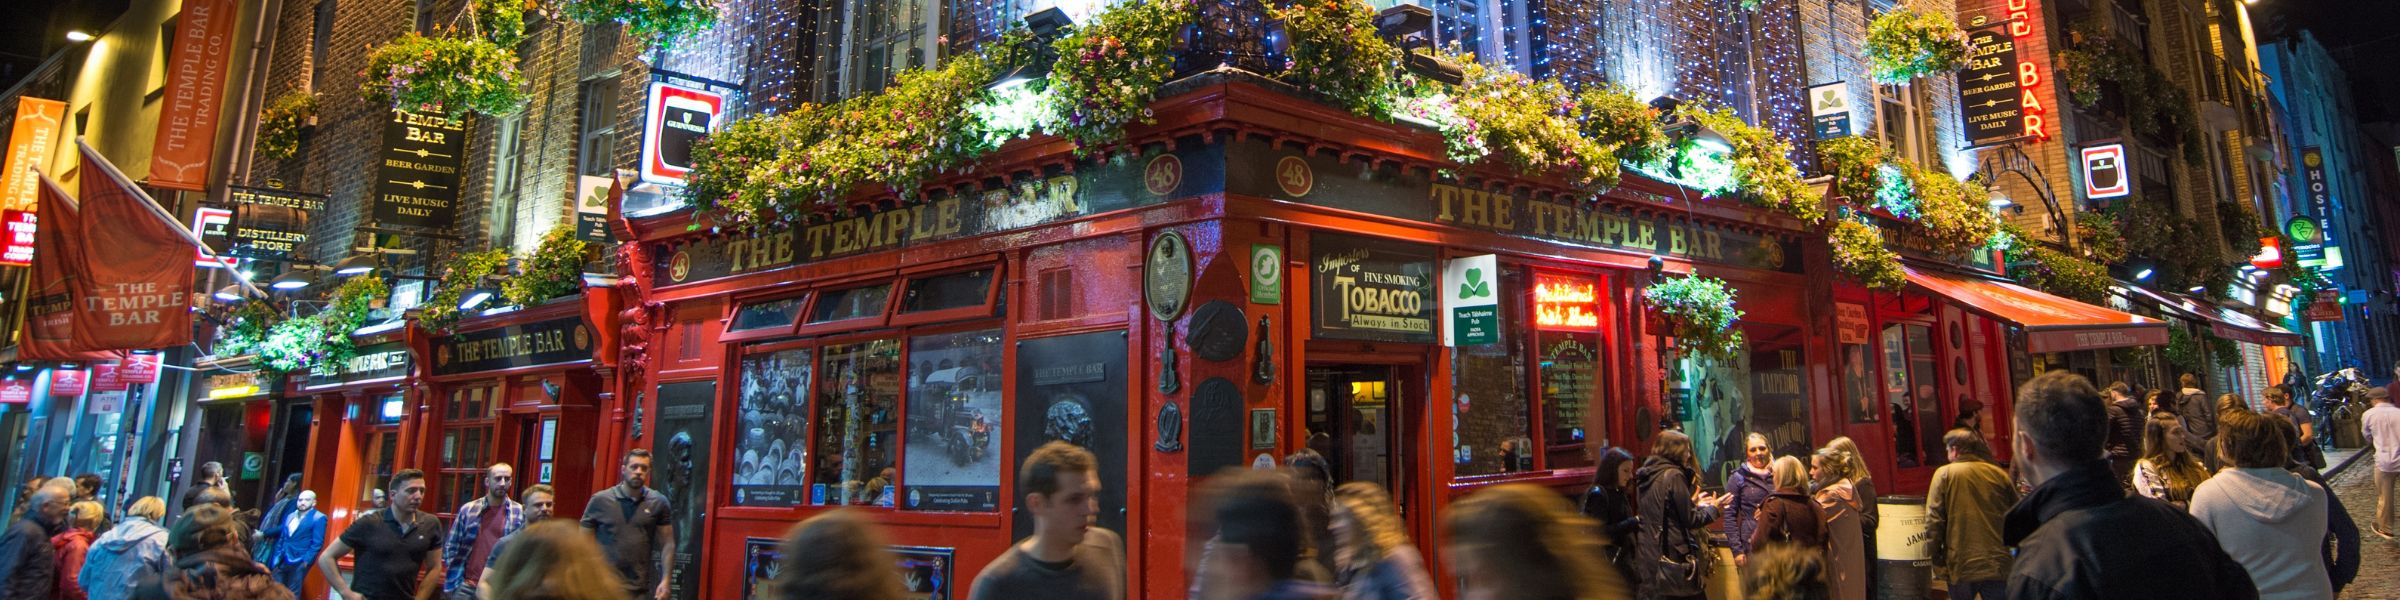 The Temple Bar near to The Grafton Hotel